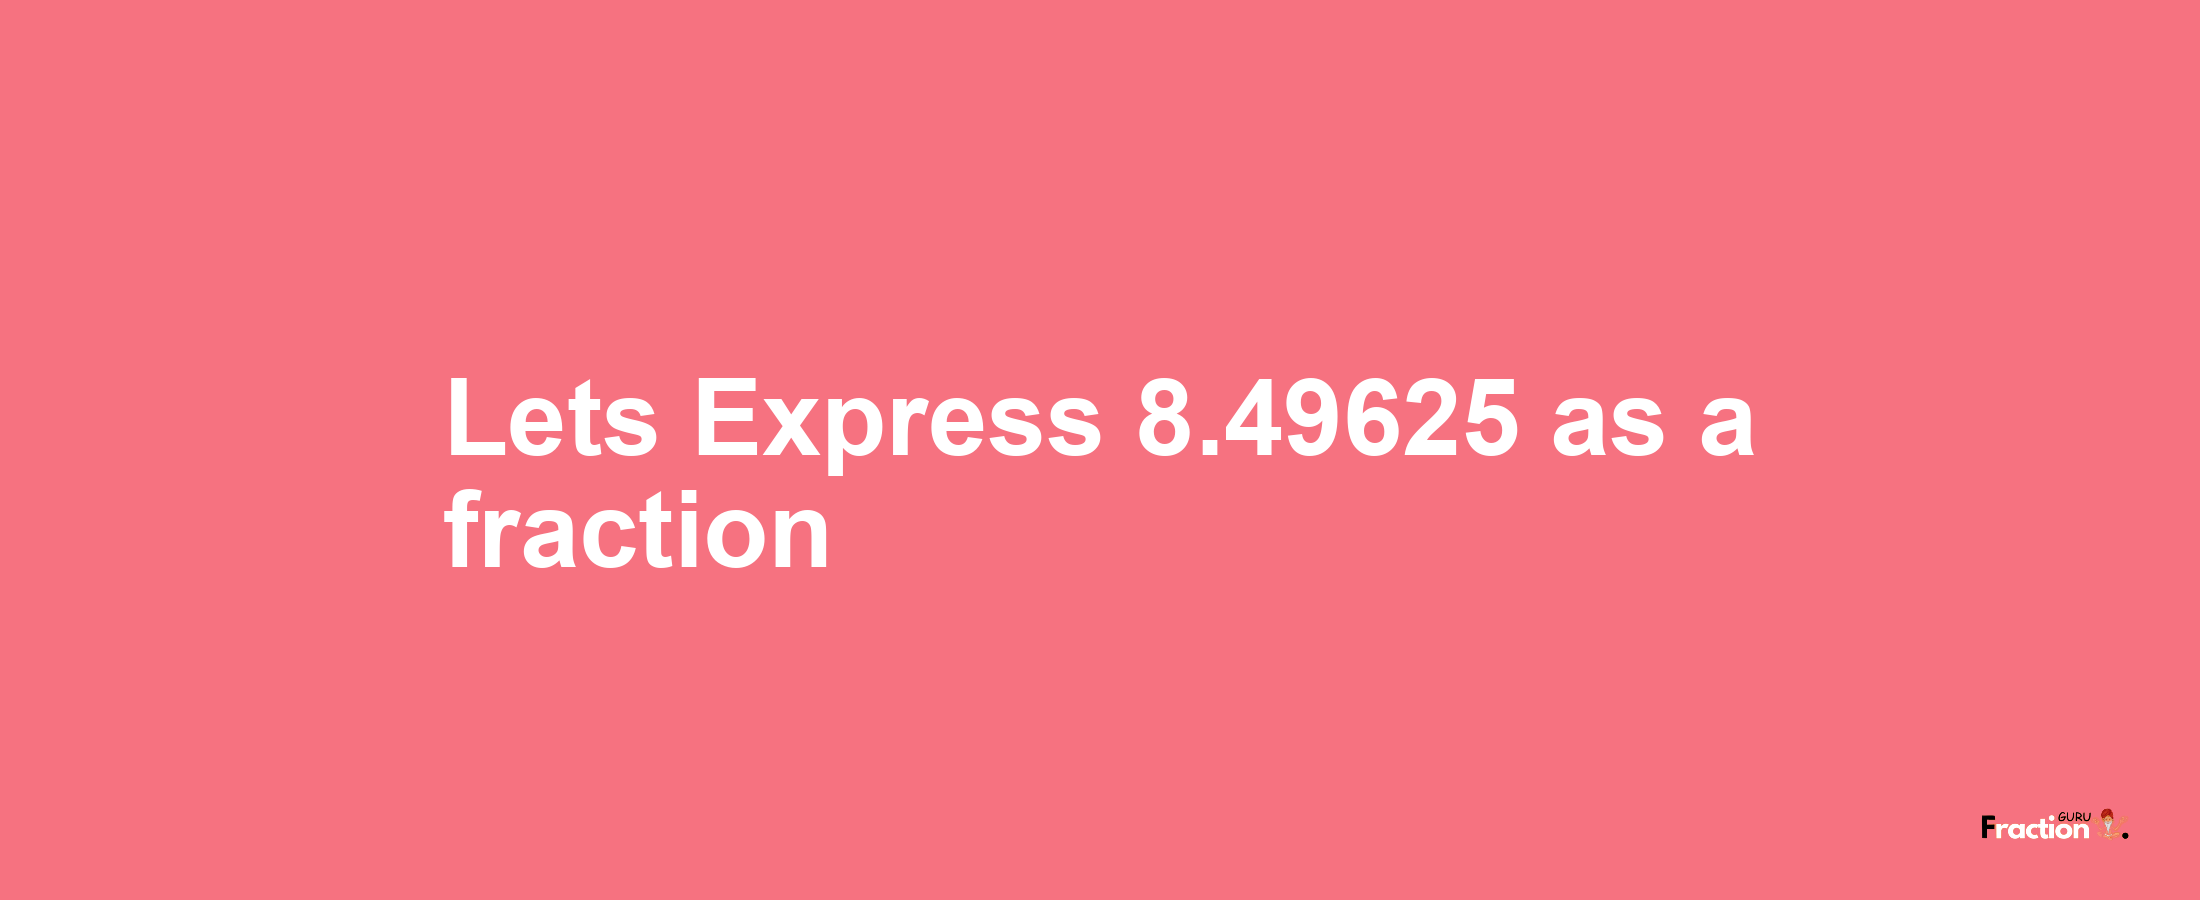 Lets Express 8.49625 as afraction